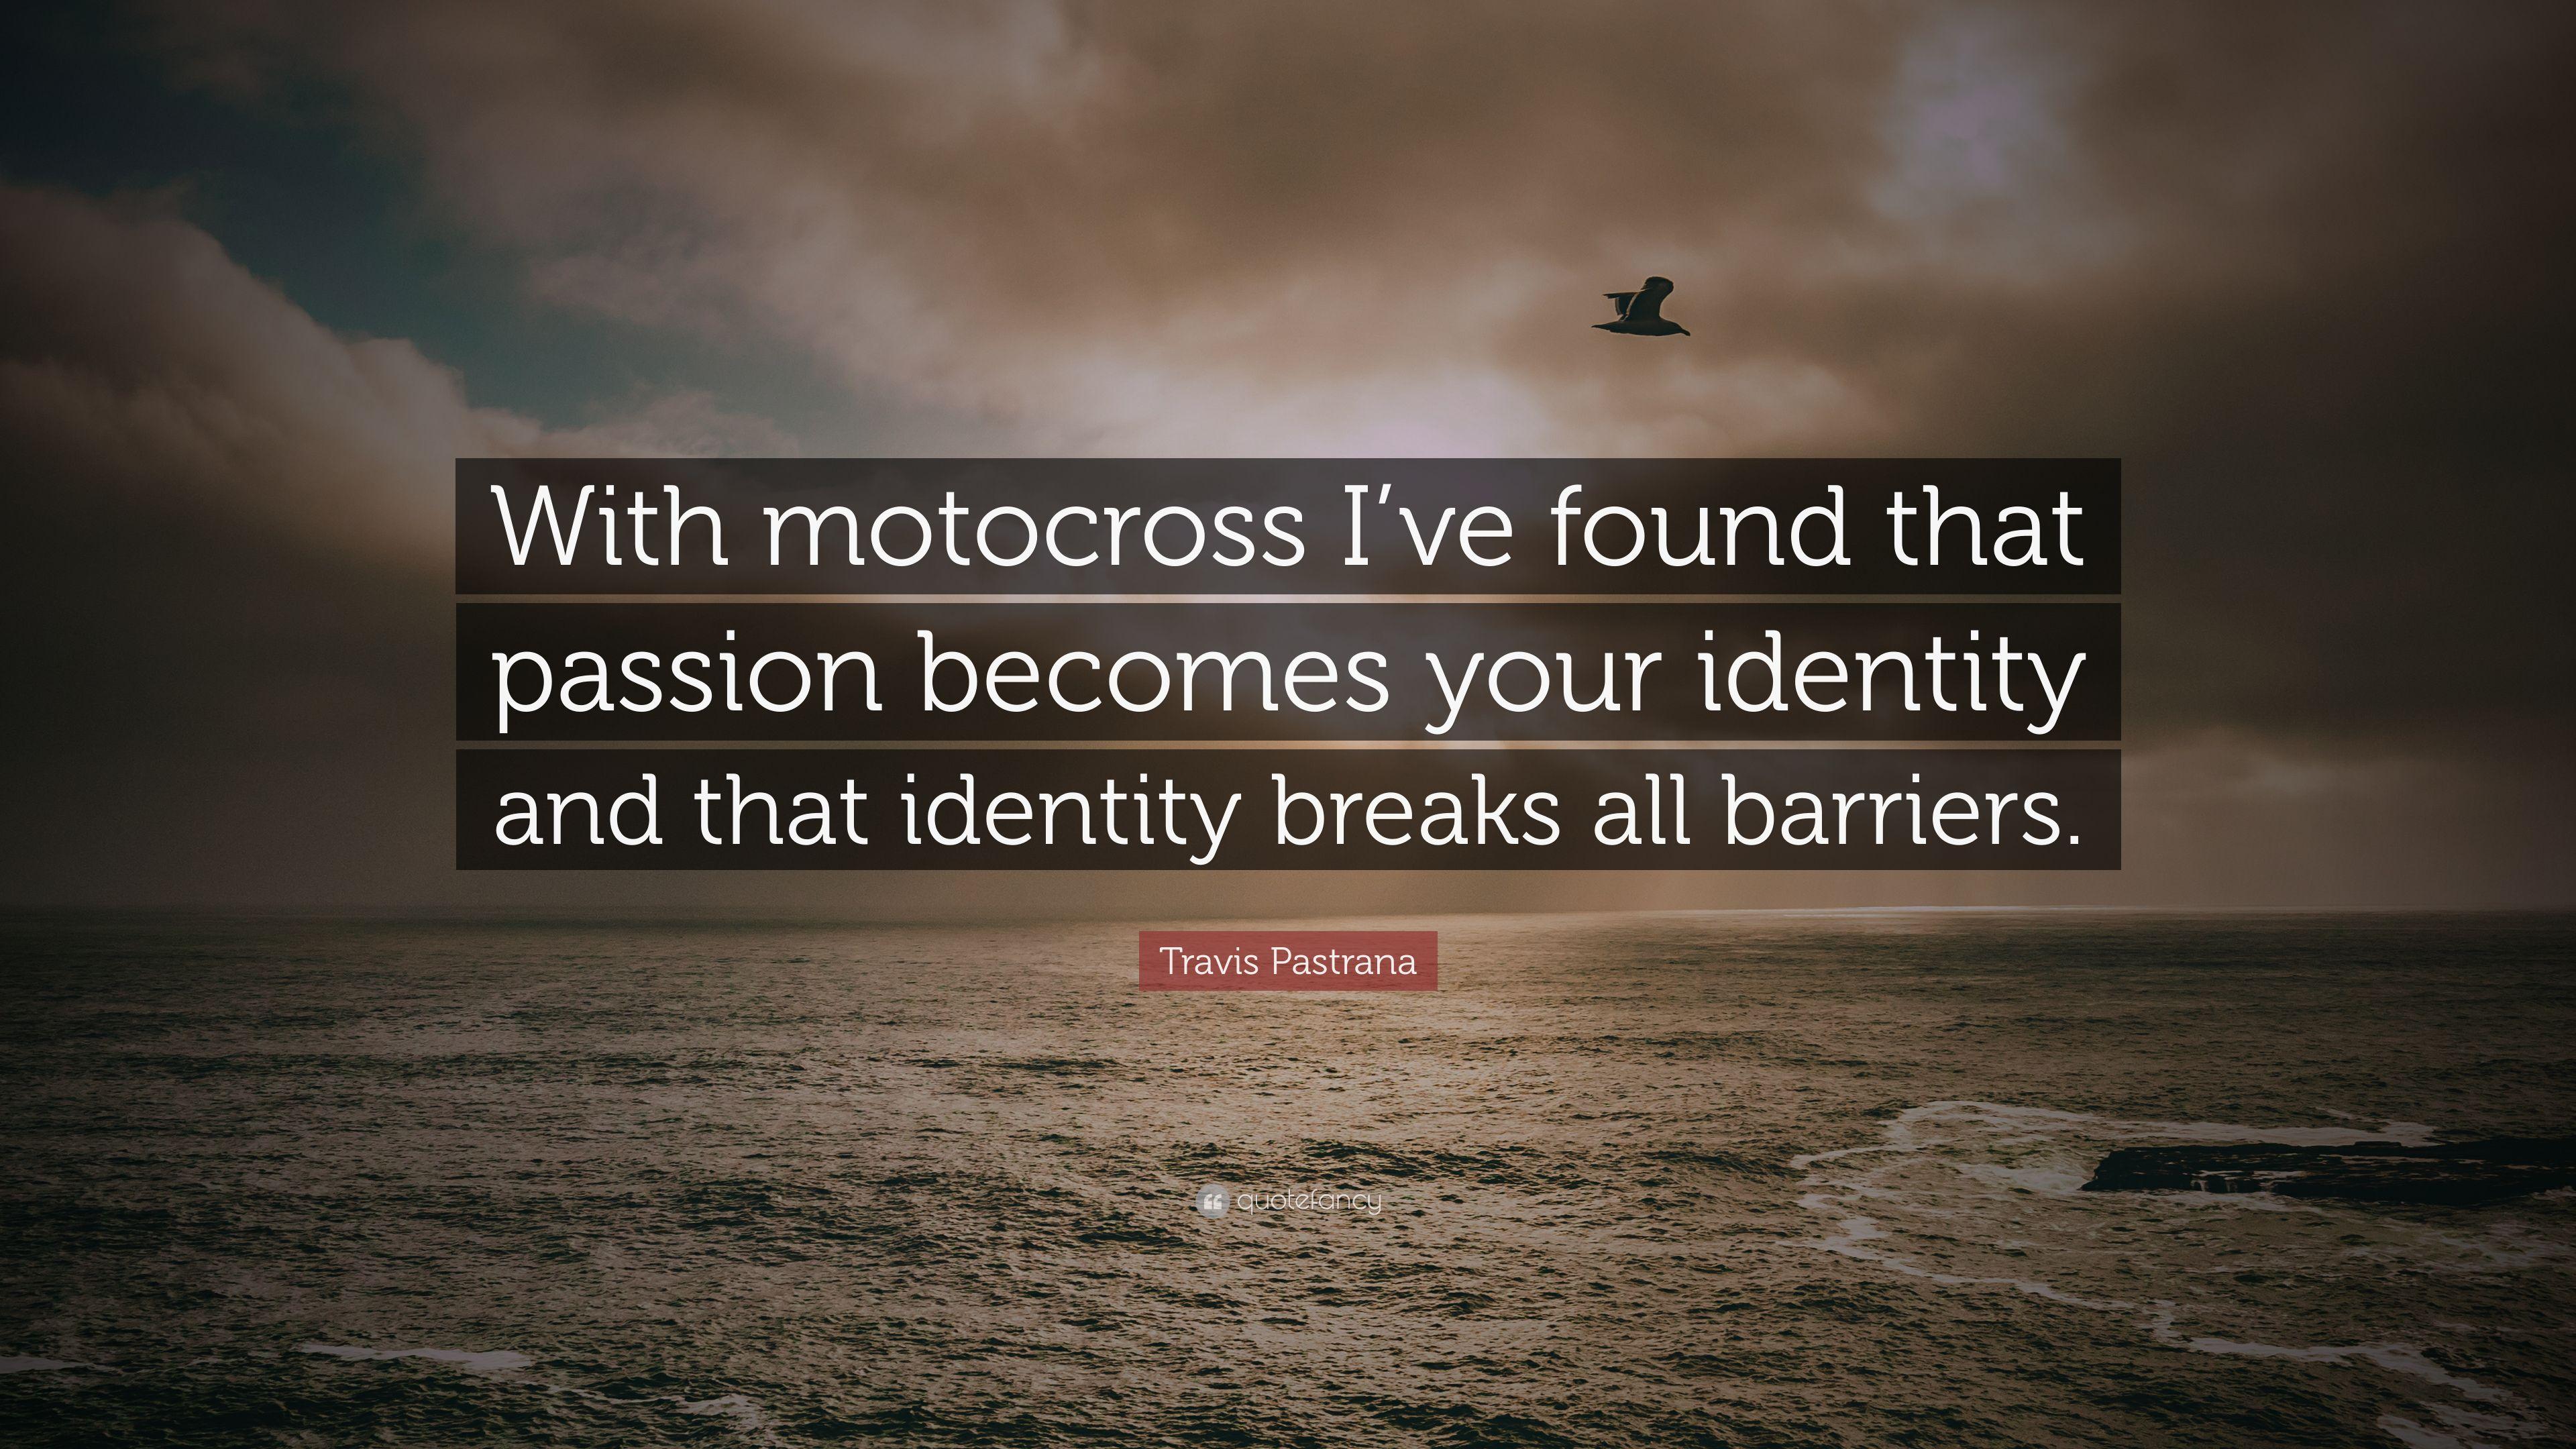 Travis Pastrana Quote: “With motocross I've found that passion